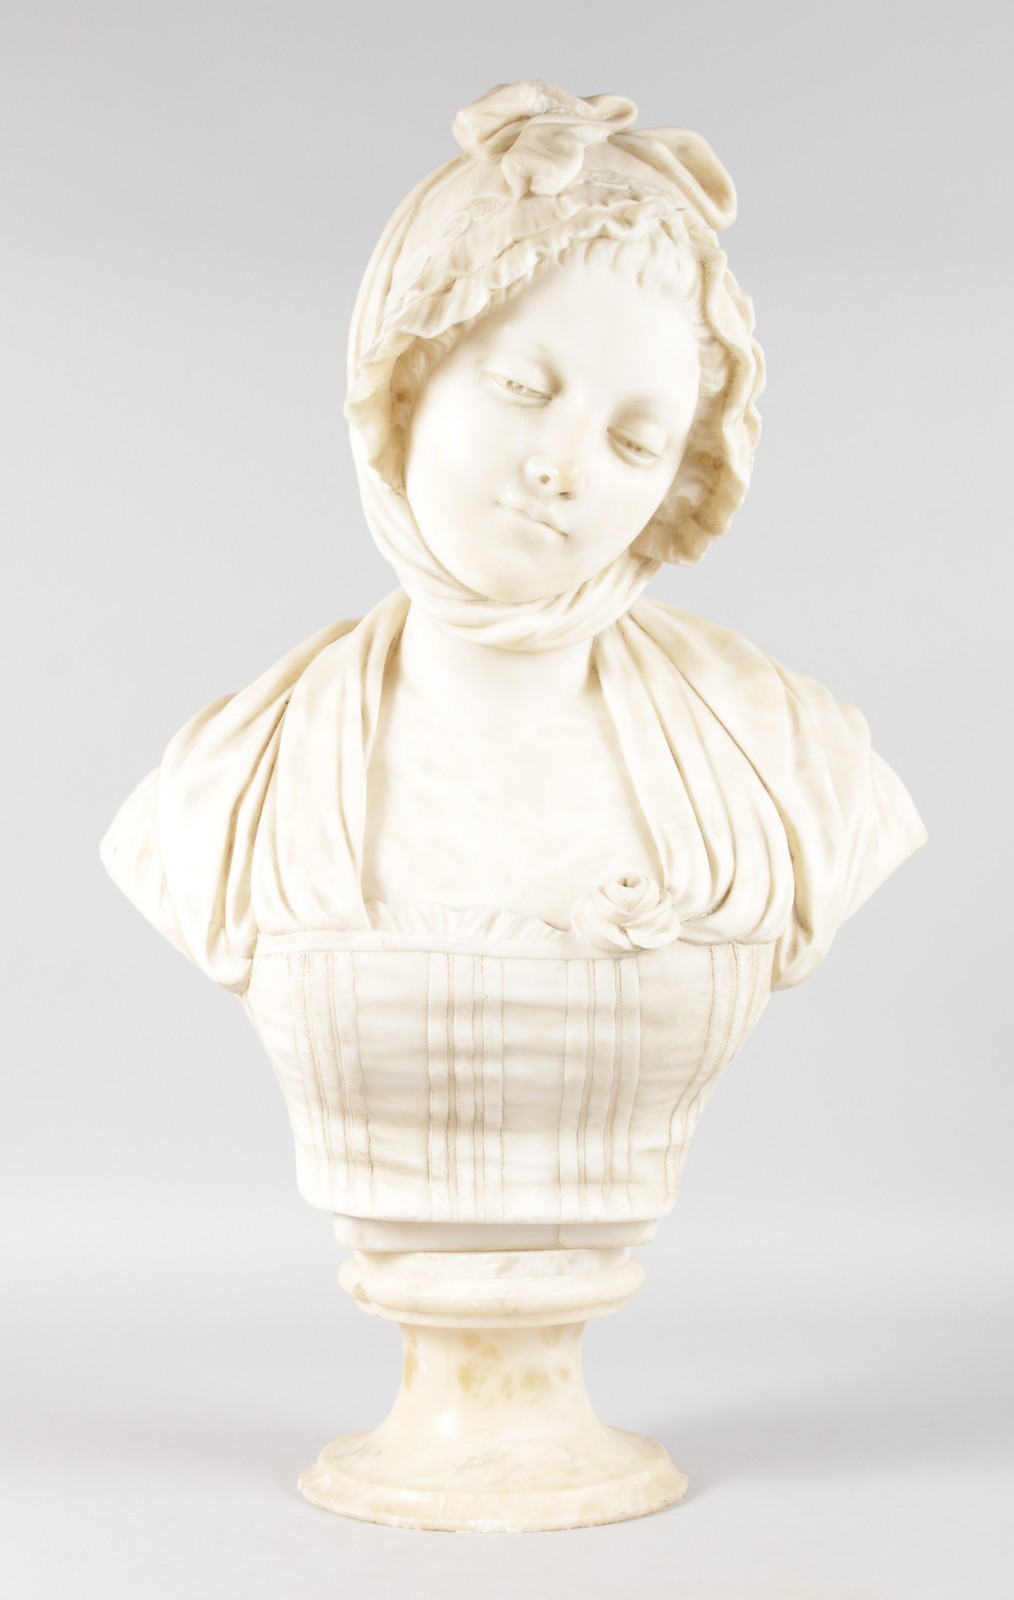 A SUPERB QUALITY 19TH CENTURY FRENCH CARVED WHITE MARBLE BUST OF A YOUNG GIRL, wearing a bonnet,